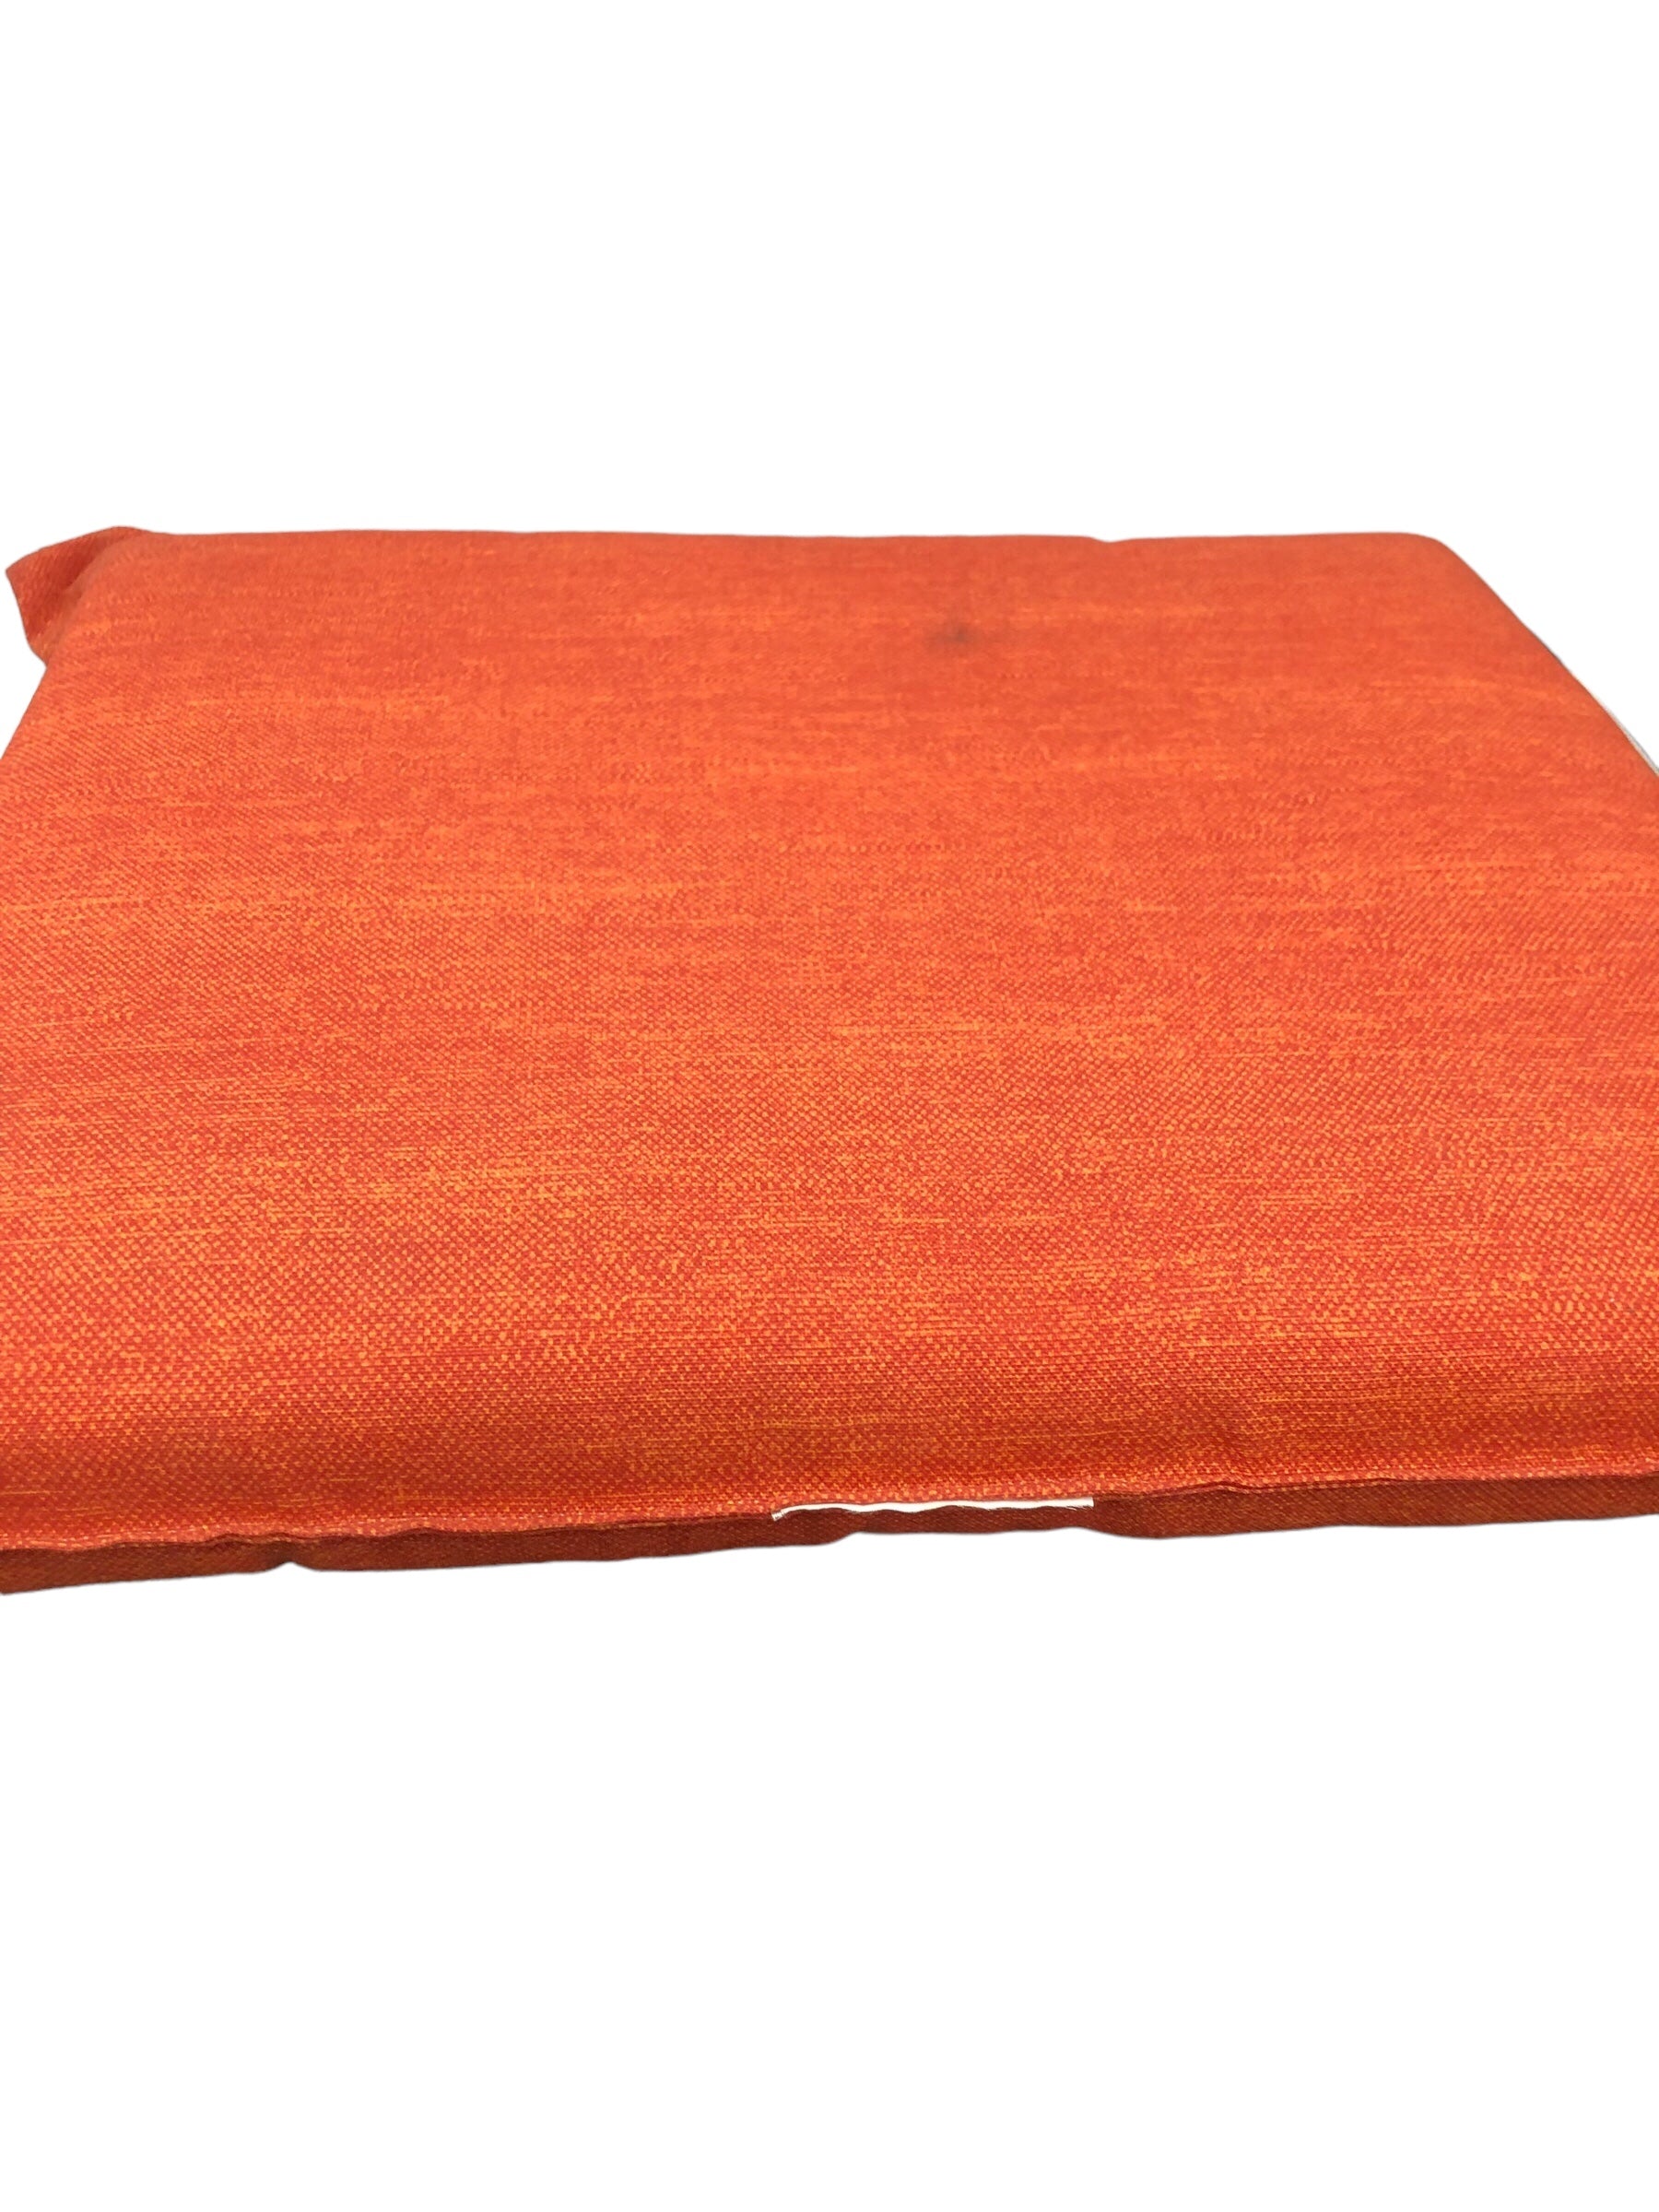 Orange Chair Pad with tie